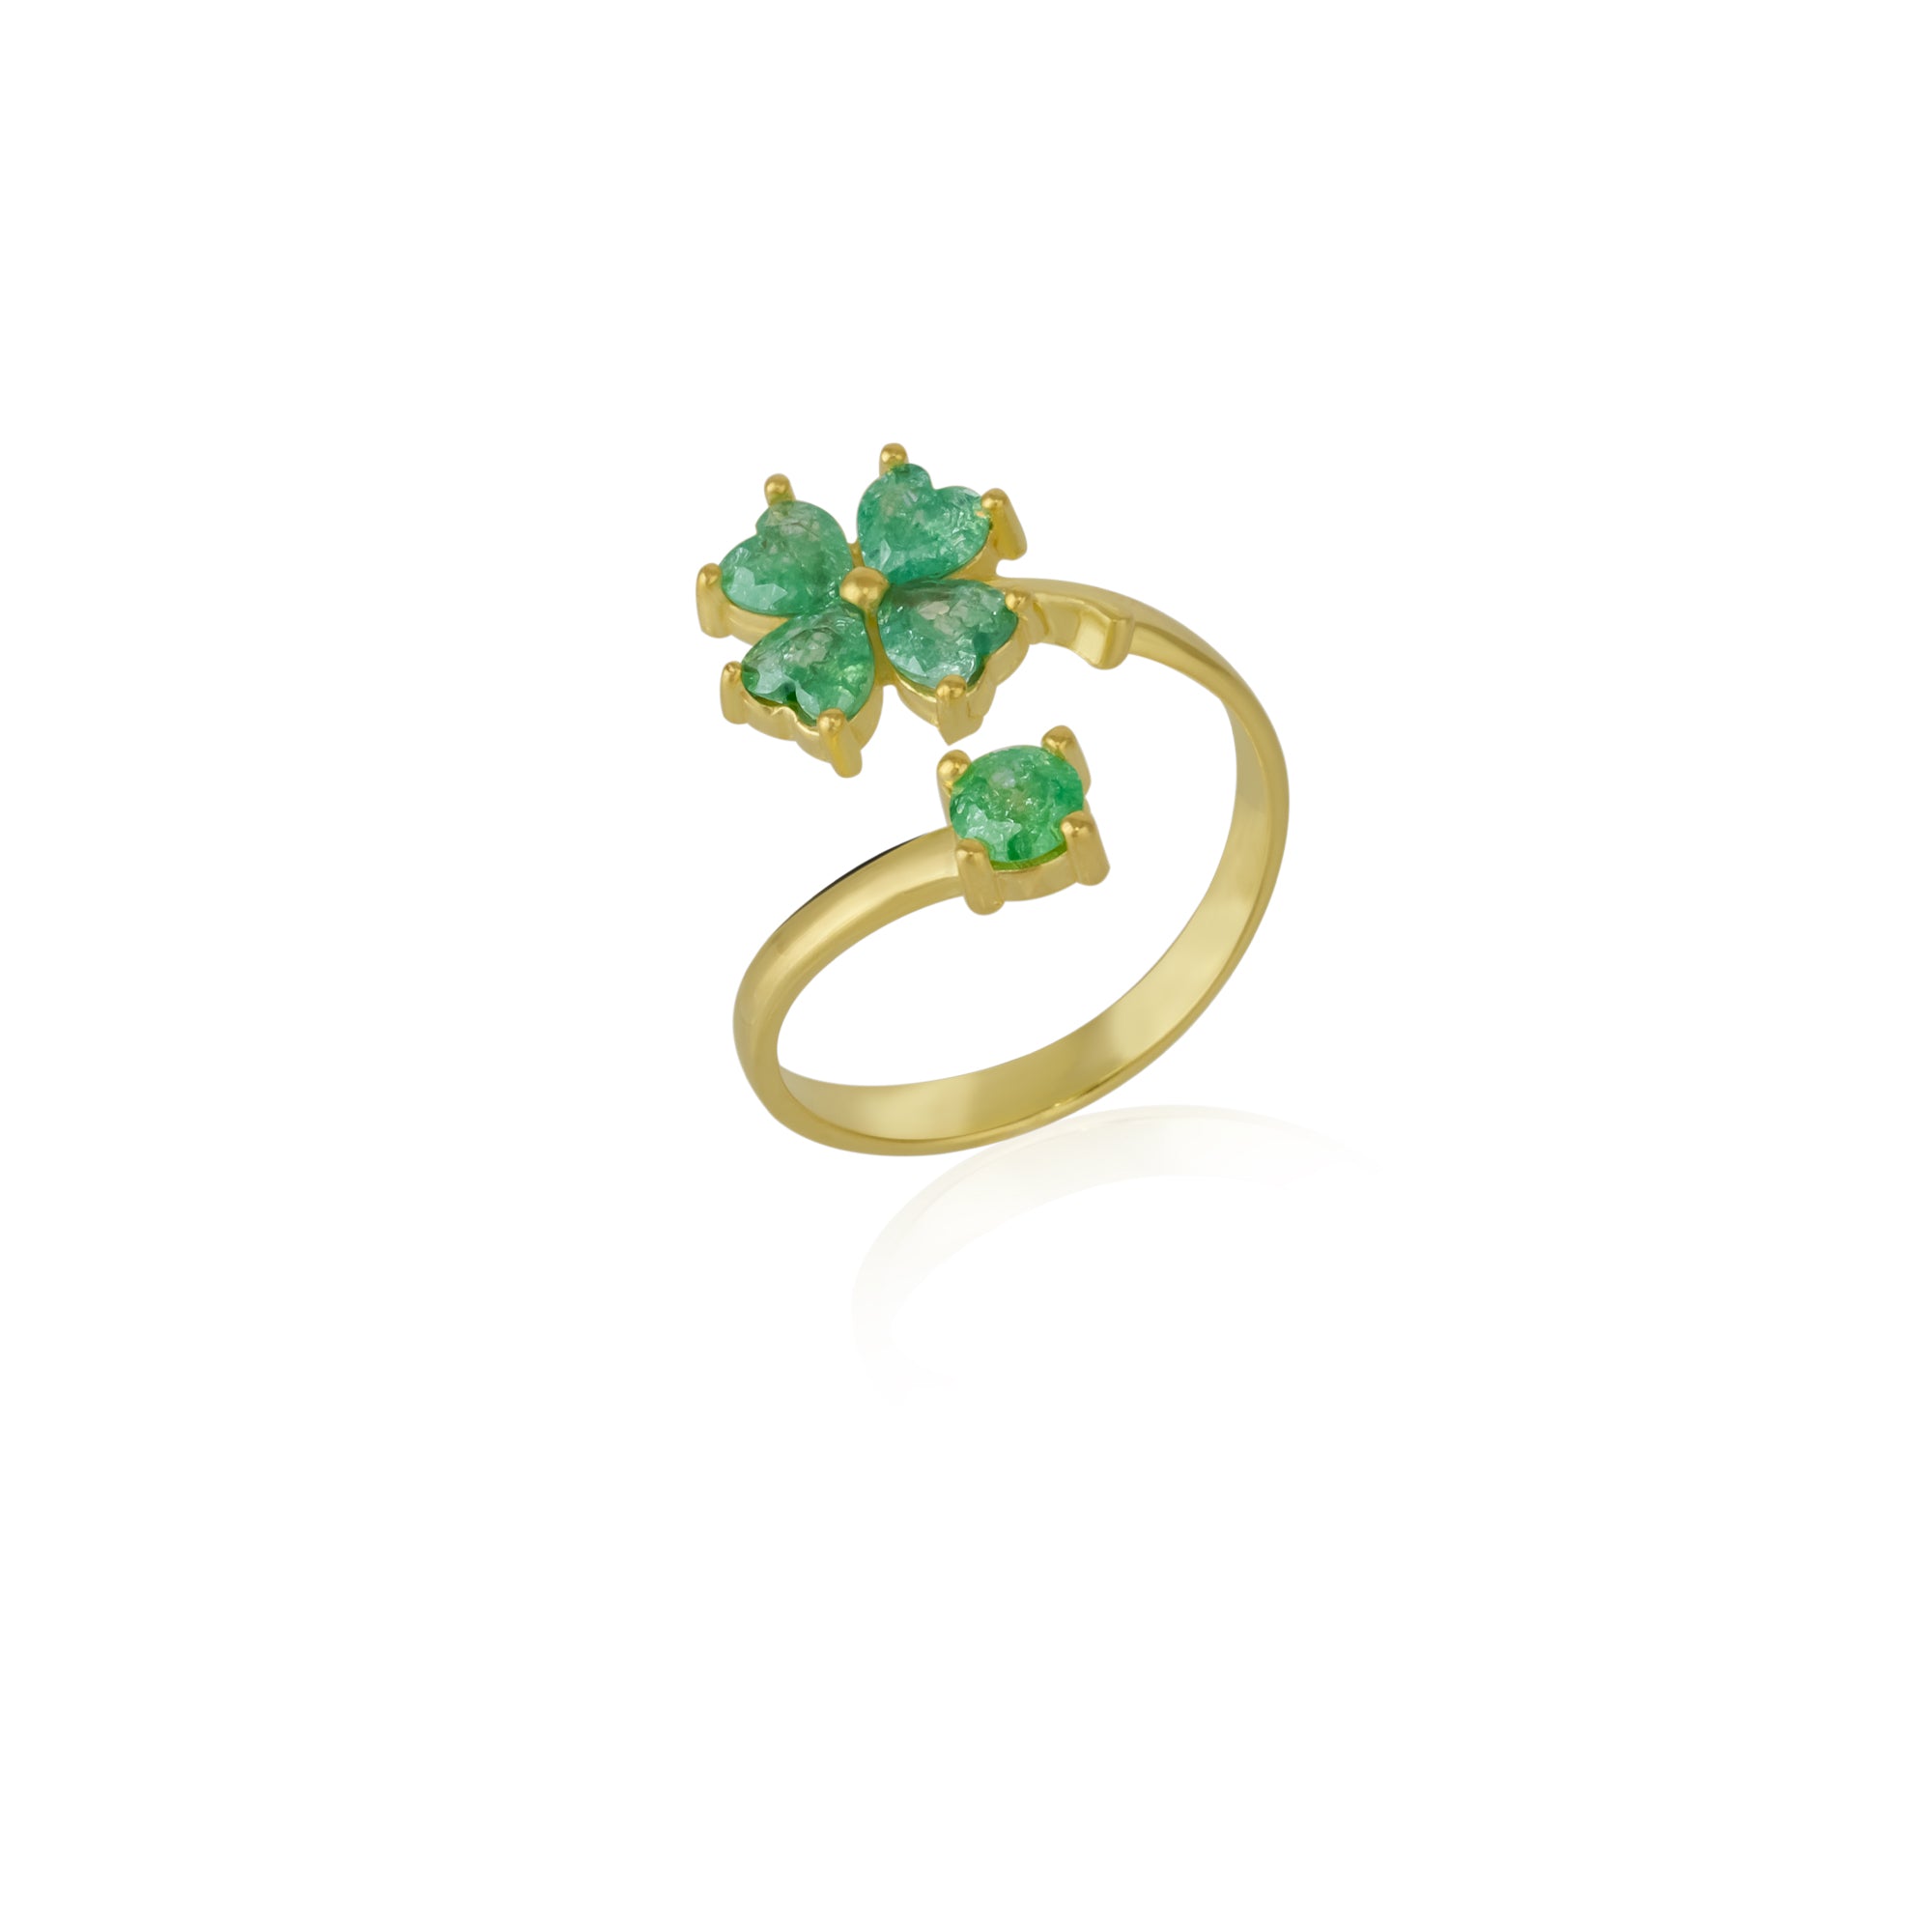 Green Four Leaves Clover Luck Ring Sterling Silver